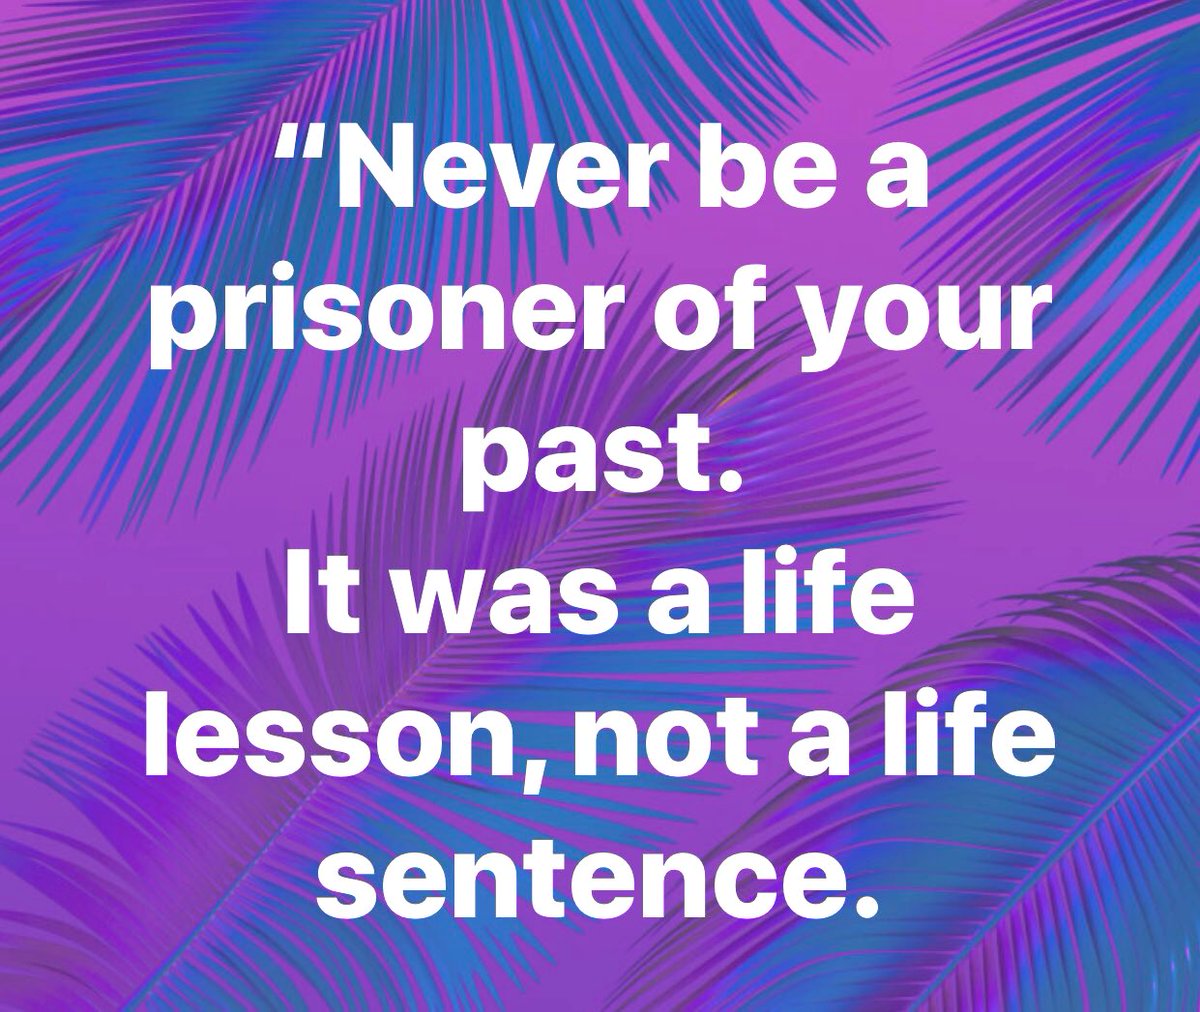 “Never be a prisoner of your past.  It was a life lesson, not a life sentence.” #KeepMovingForward #LessonsInLife #ThinkBIGSundayWithMarsha